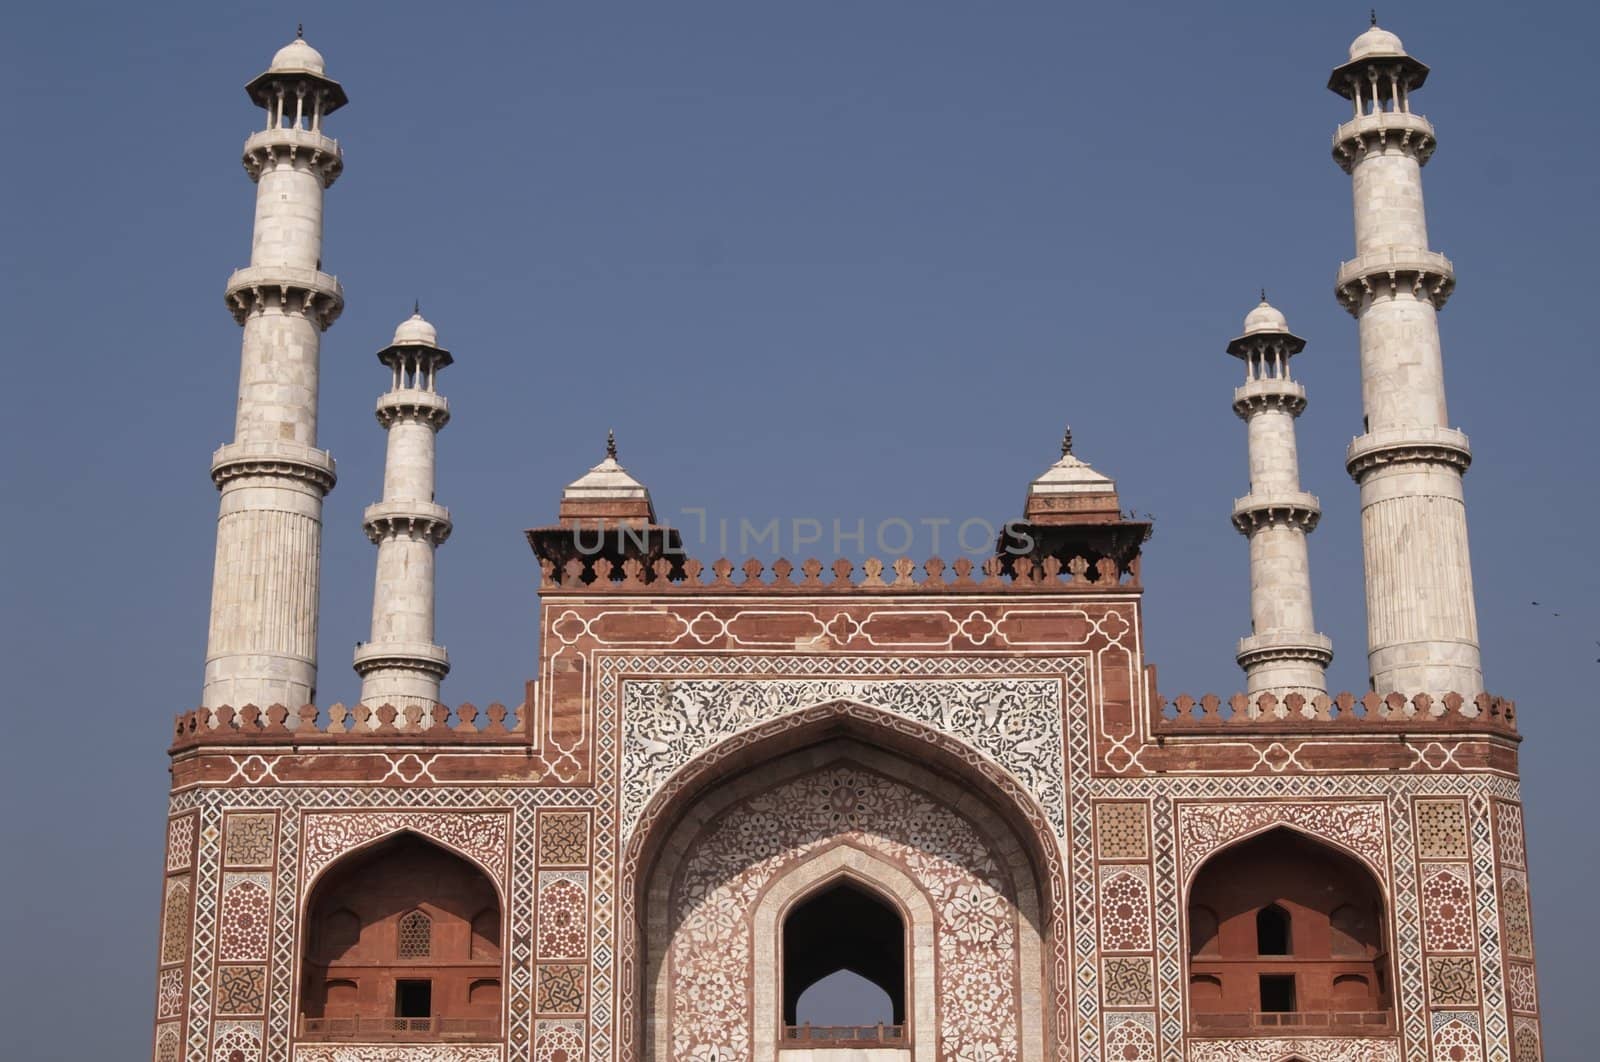 Ornate entrance to Akbar's Tomb. Islamic style architecture. Red sandstone building inlaid with white marble with marble minarets at each corner. Sikandra, Agra, India